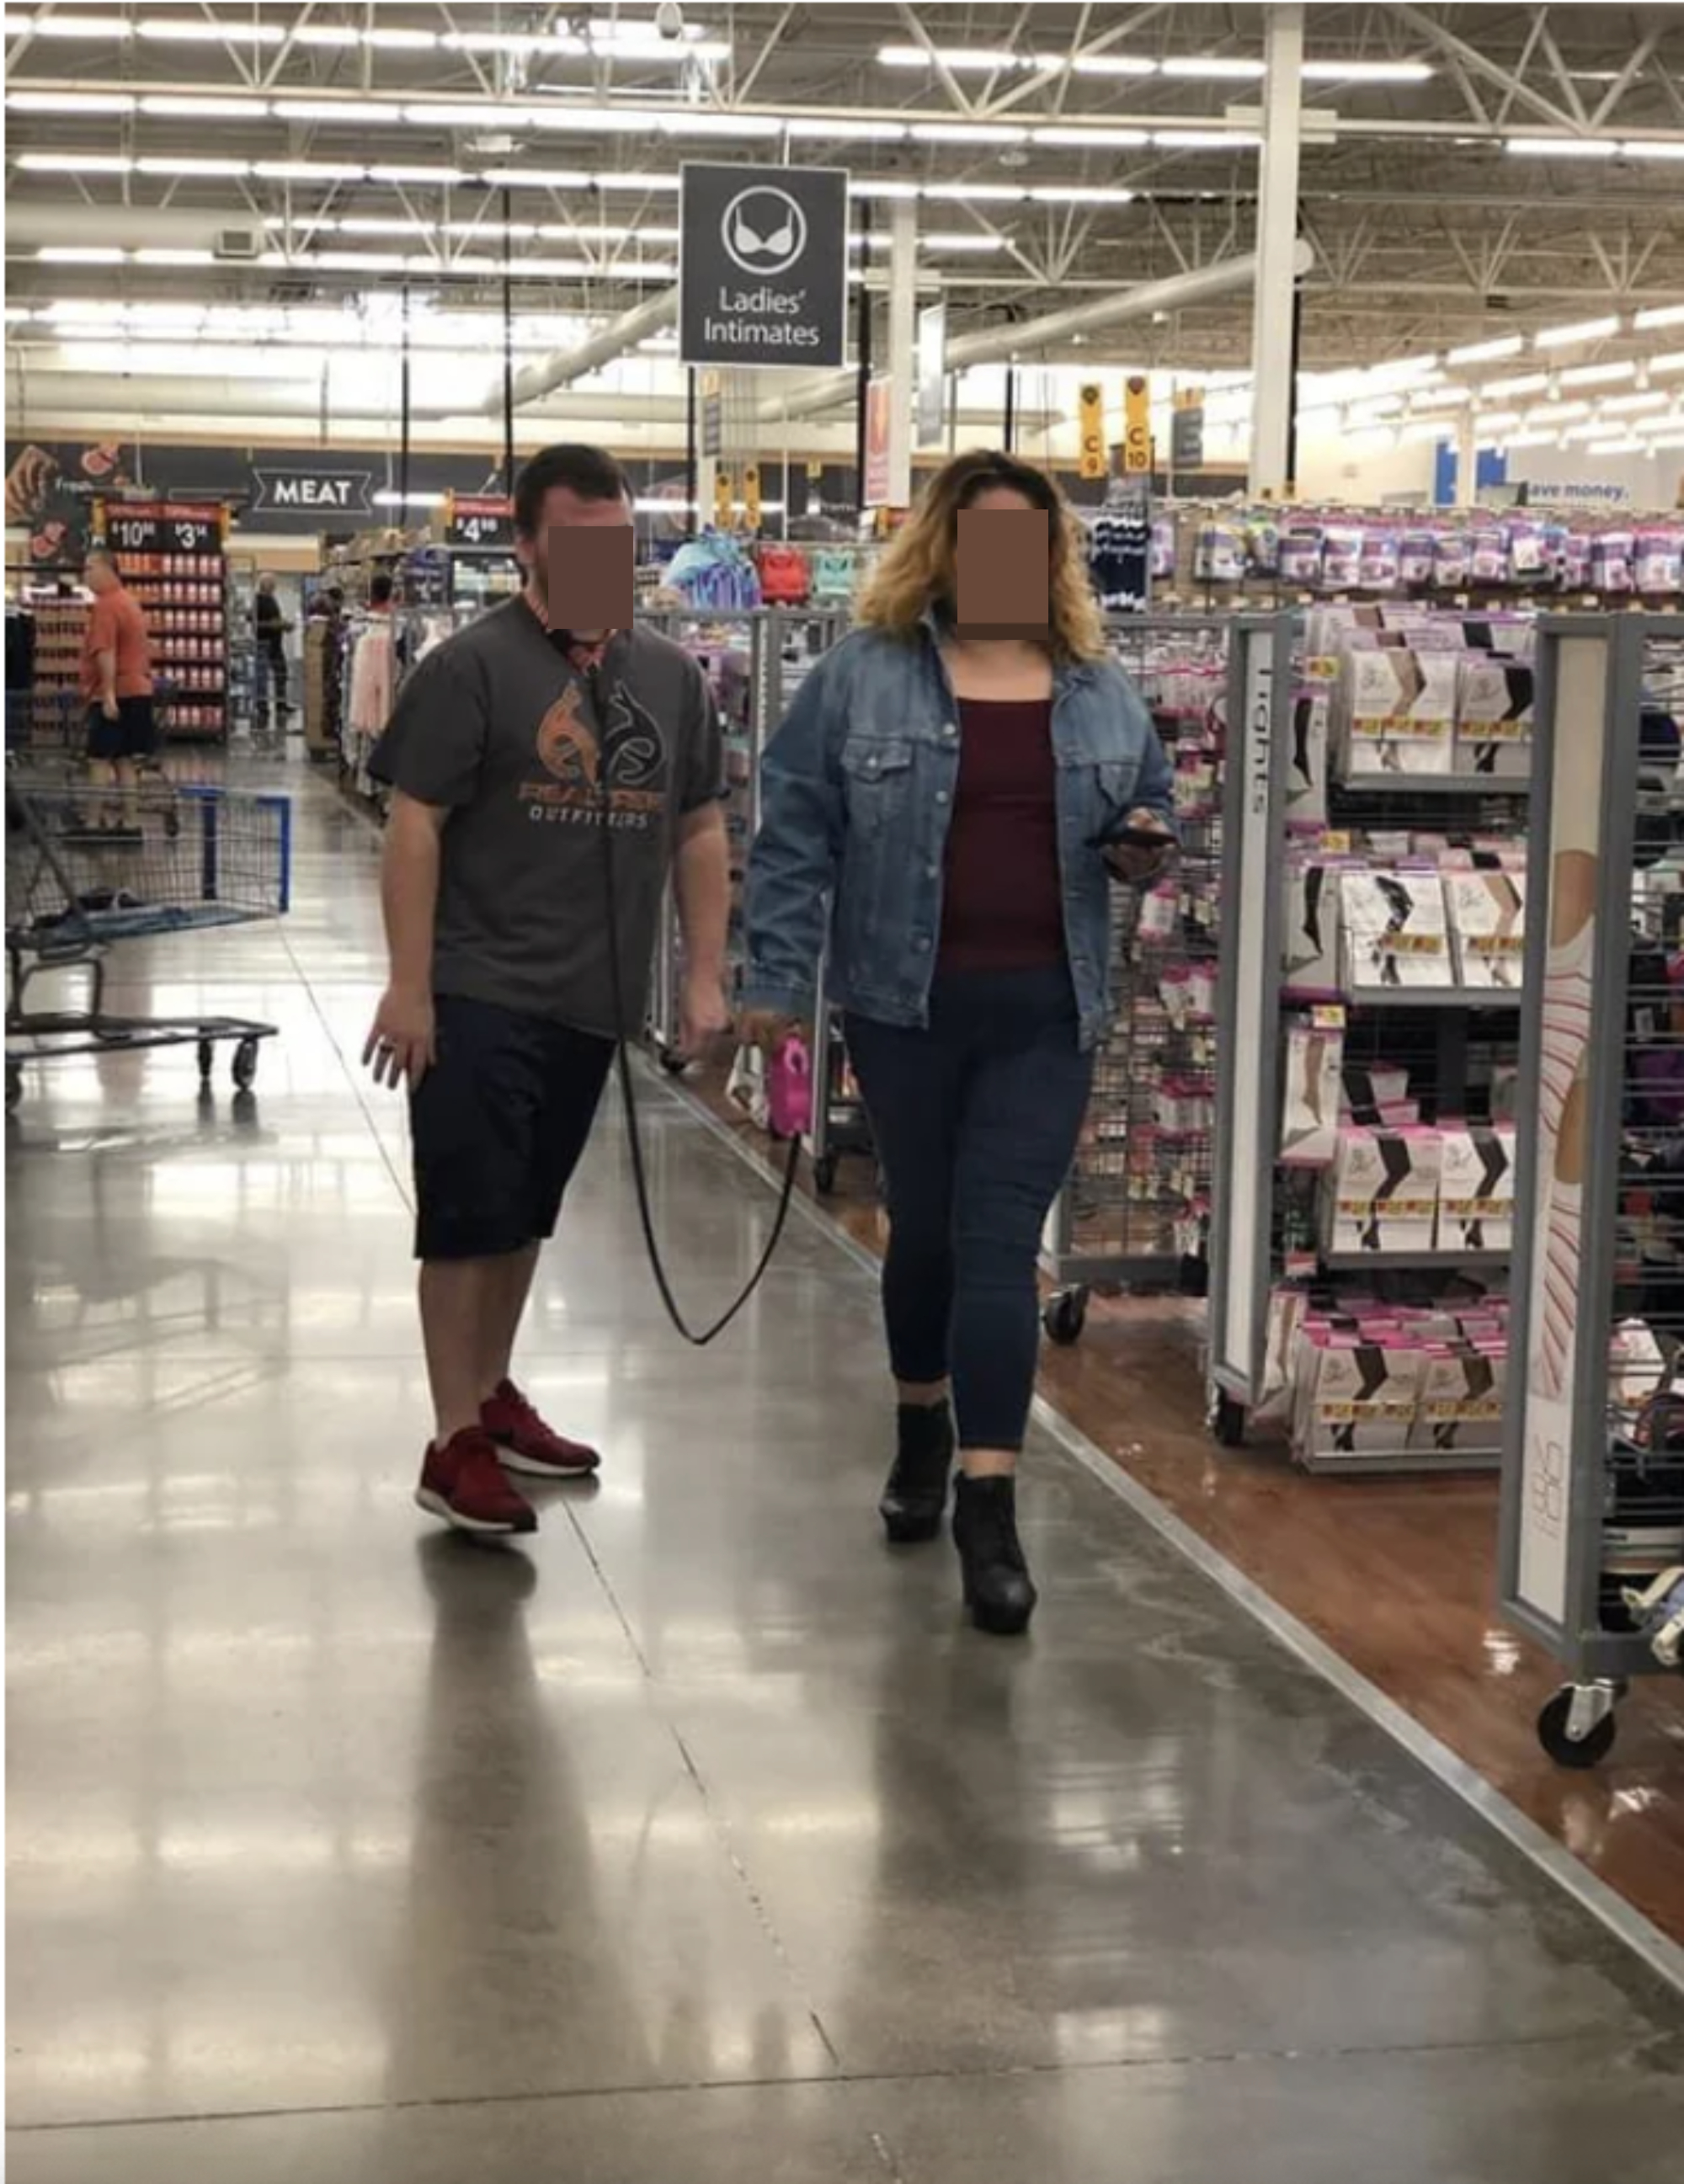 A couple at a grocery store, where the woman is pulling the man behind her on a leash